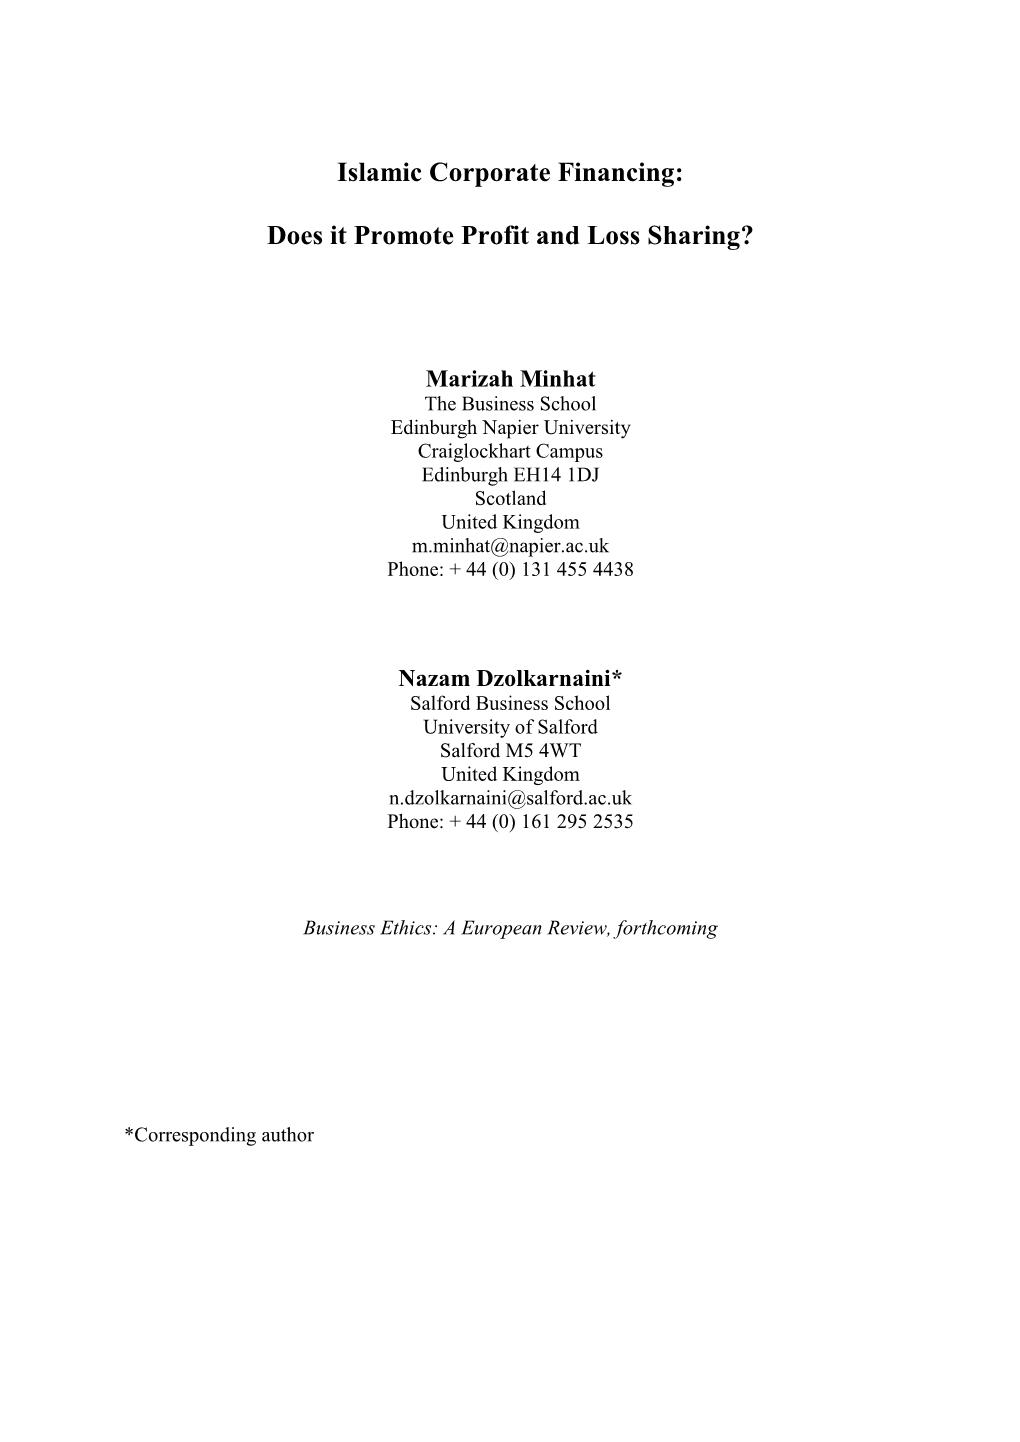 Islamic Corporate Financing: Does It Promote Profit and Loss Sharing?